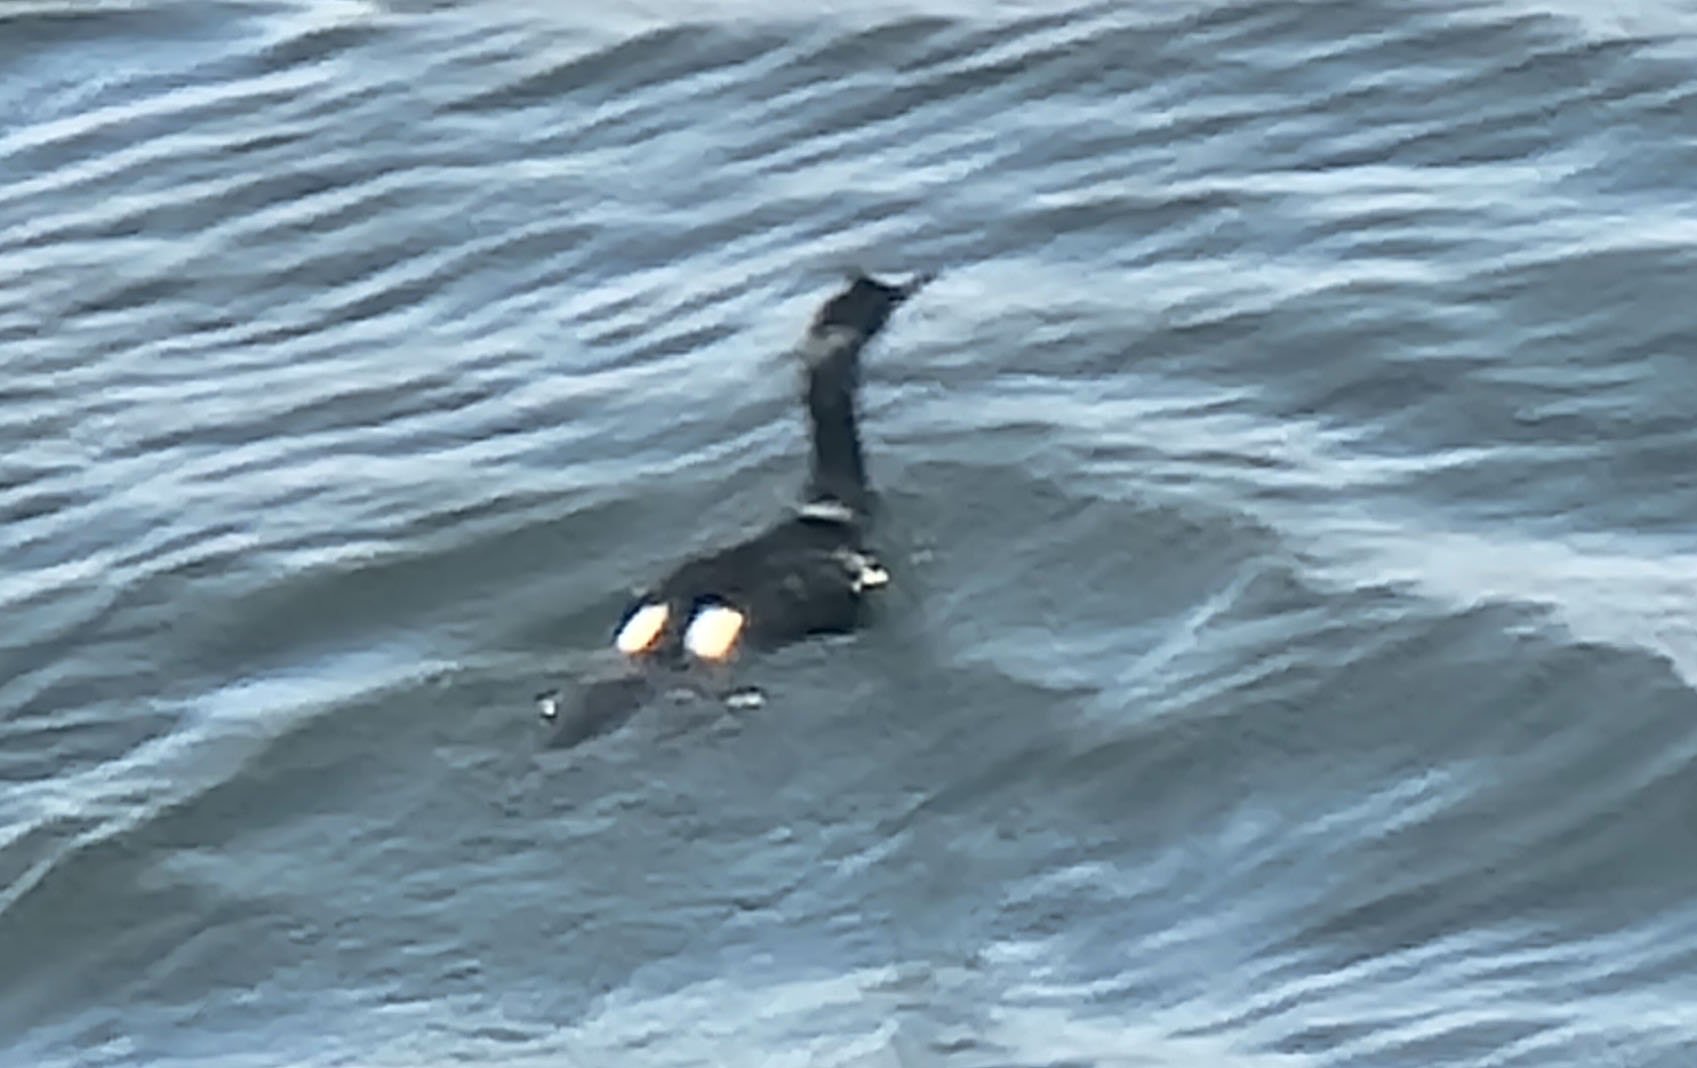 Pelagic Cormoran seen from the ferry. This is 100x zoom so pretty good all things considered.